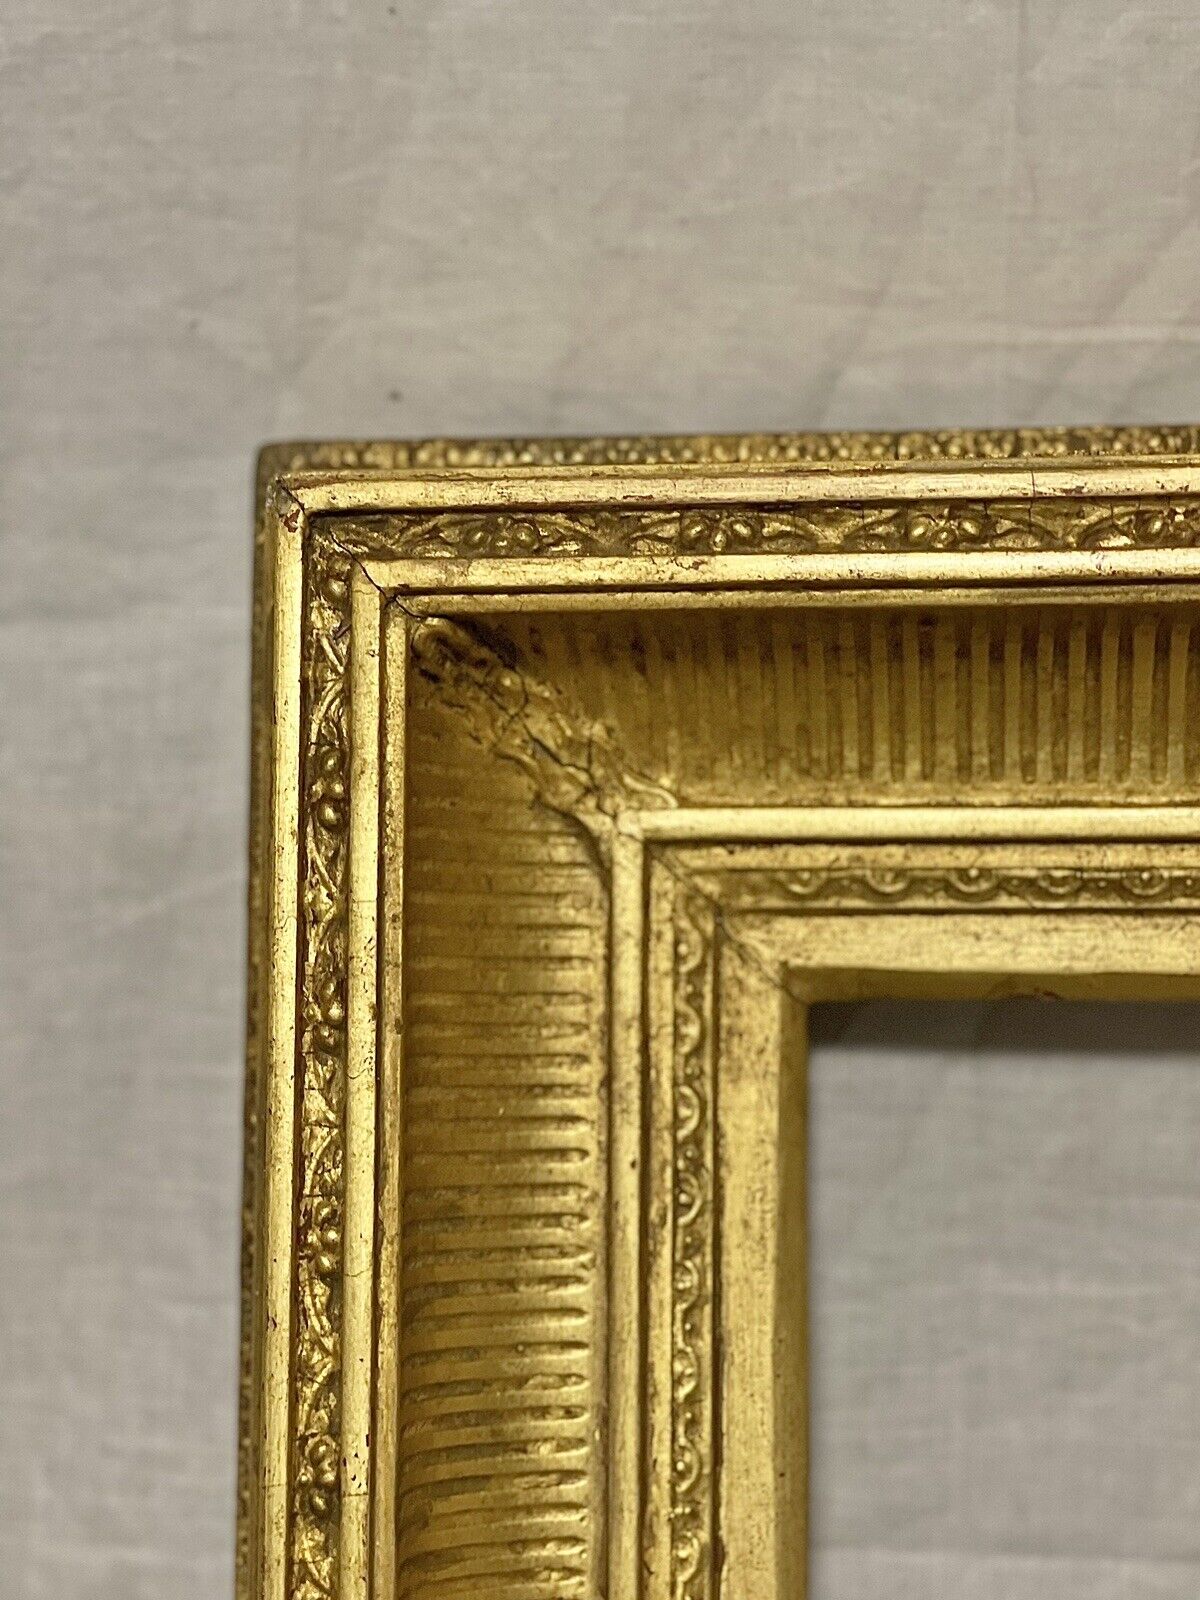 ANTIQUE  FITs 9”x15” GOLD GILT ORNATE AESTHETIC HUDSON RIVER PICTURE FRAME